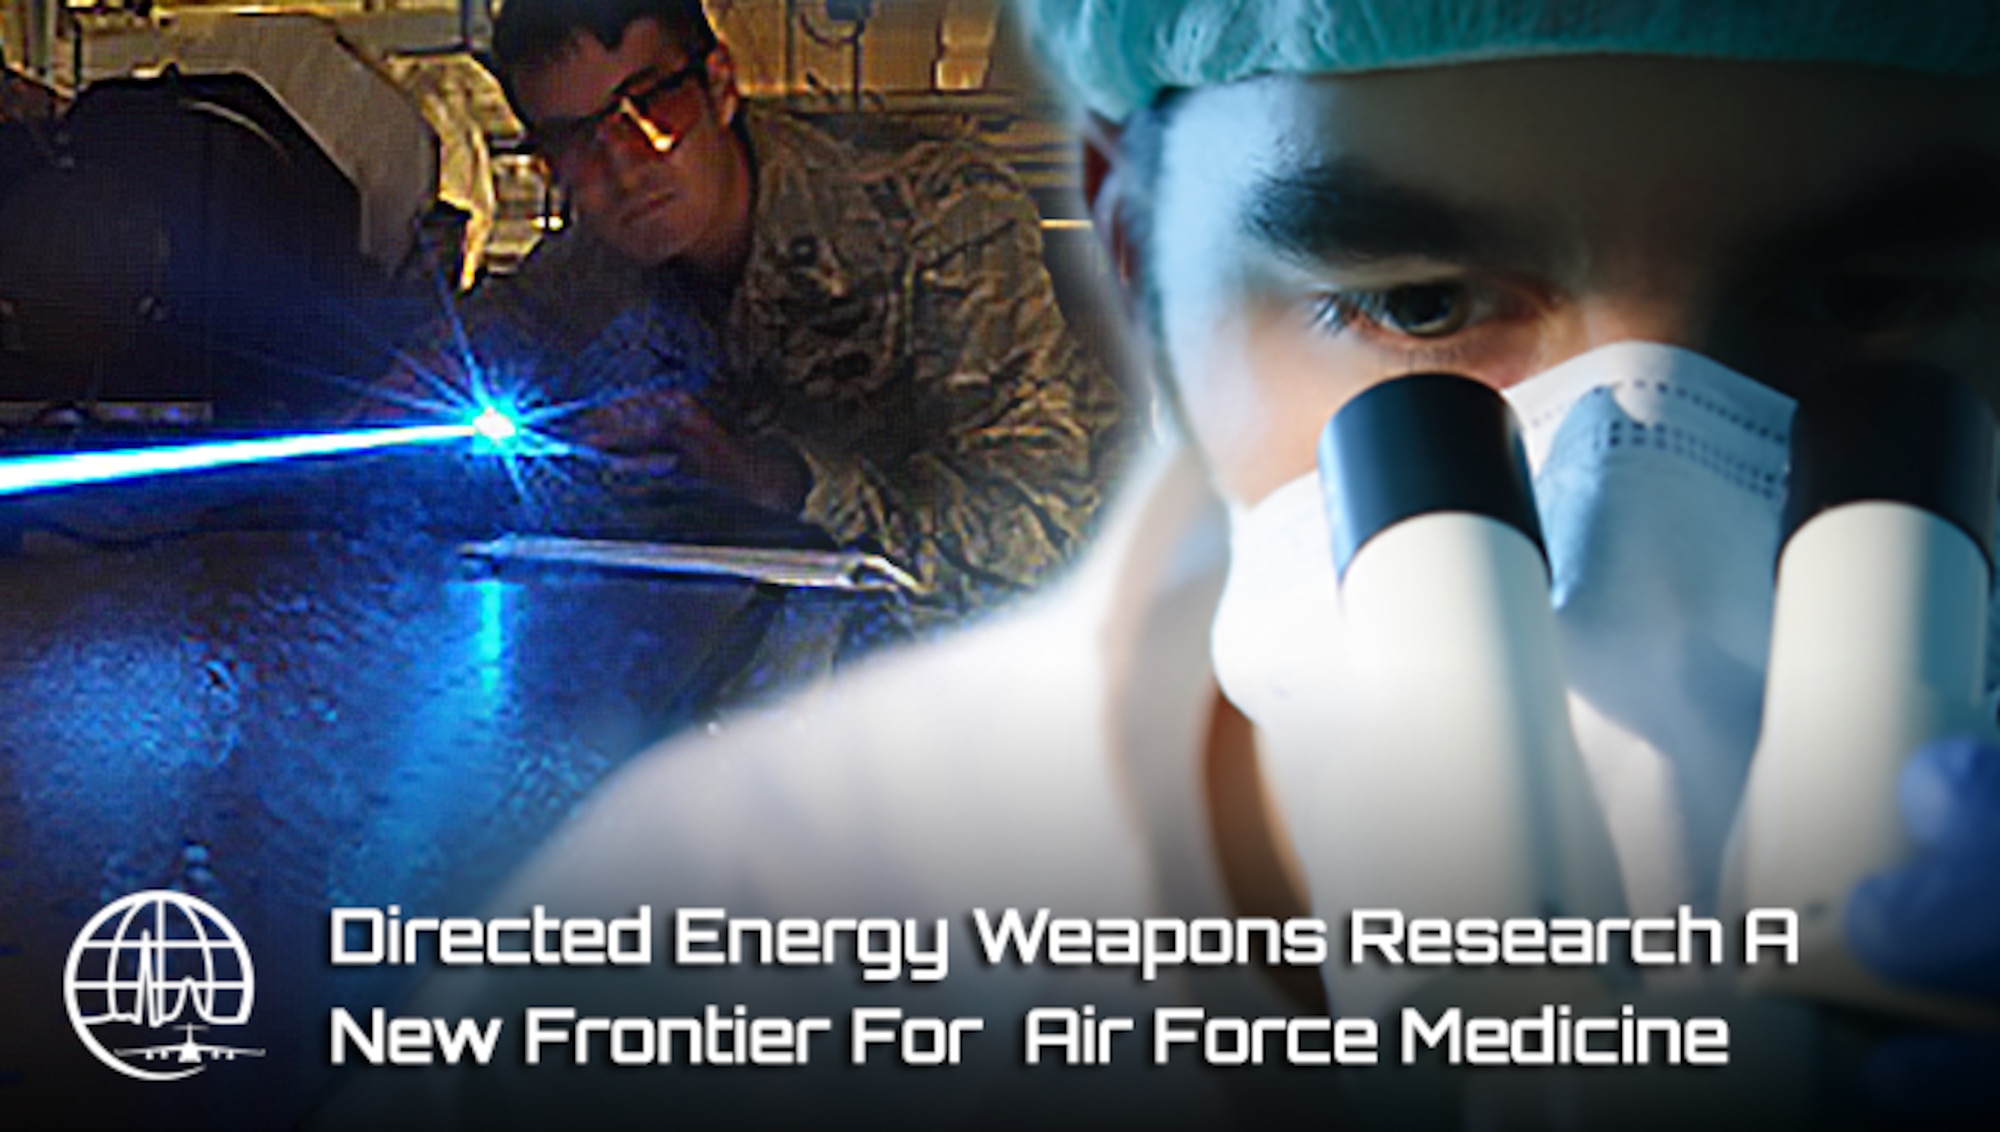 Directed energy weapons research a new frontier for Air Force Medicine